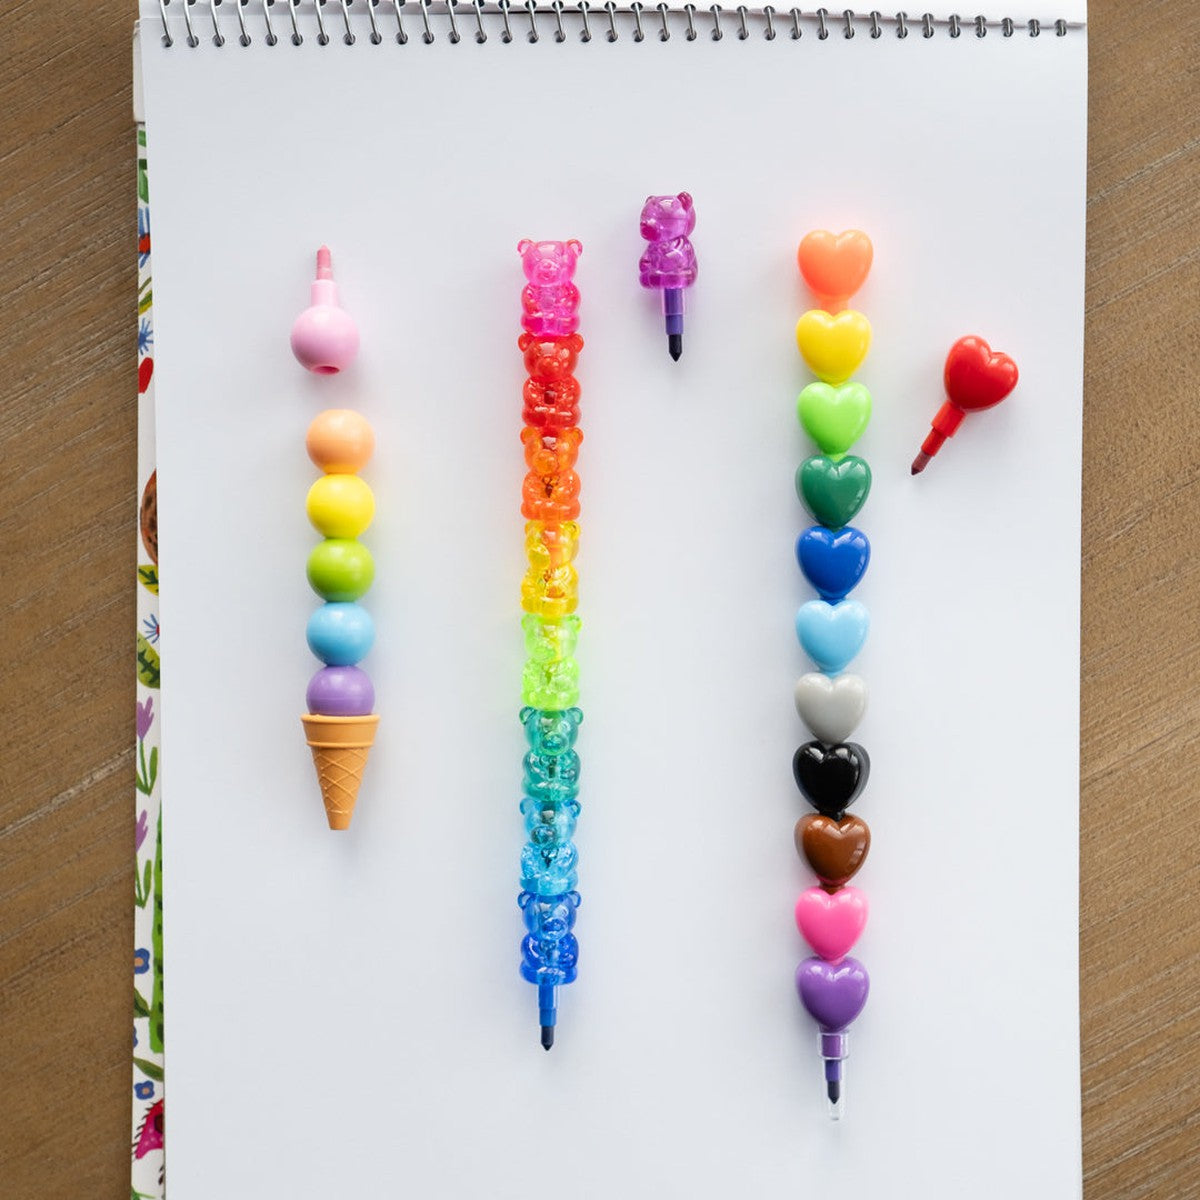 RAINBOW SCOOPS STACKING CRAYONS, FREE SHIPPING